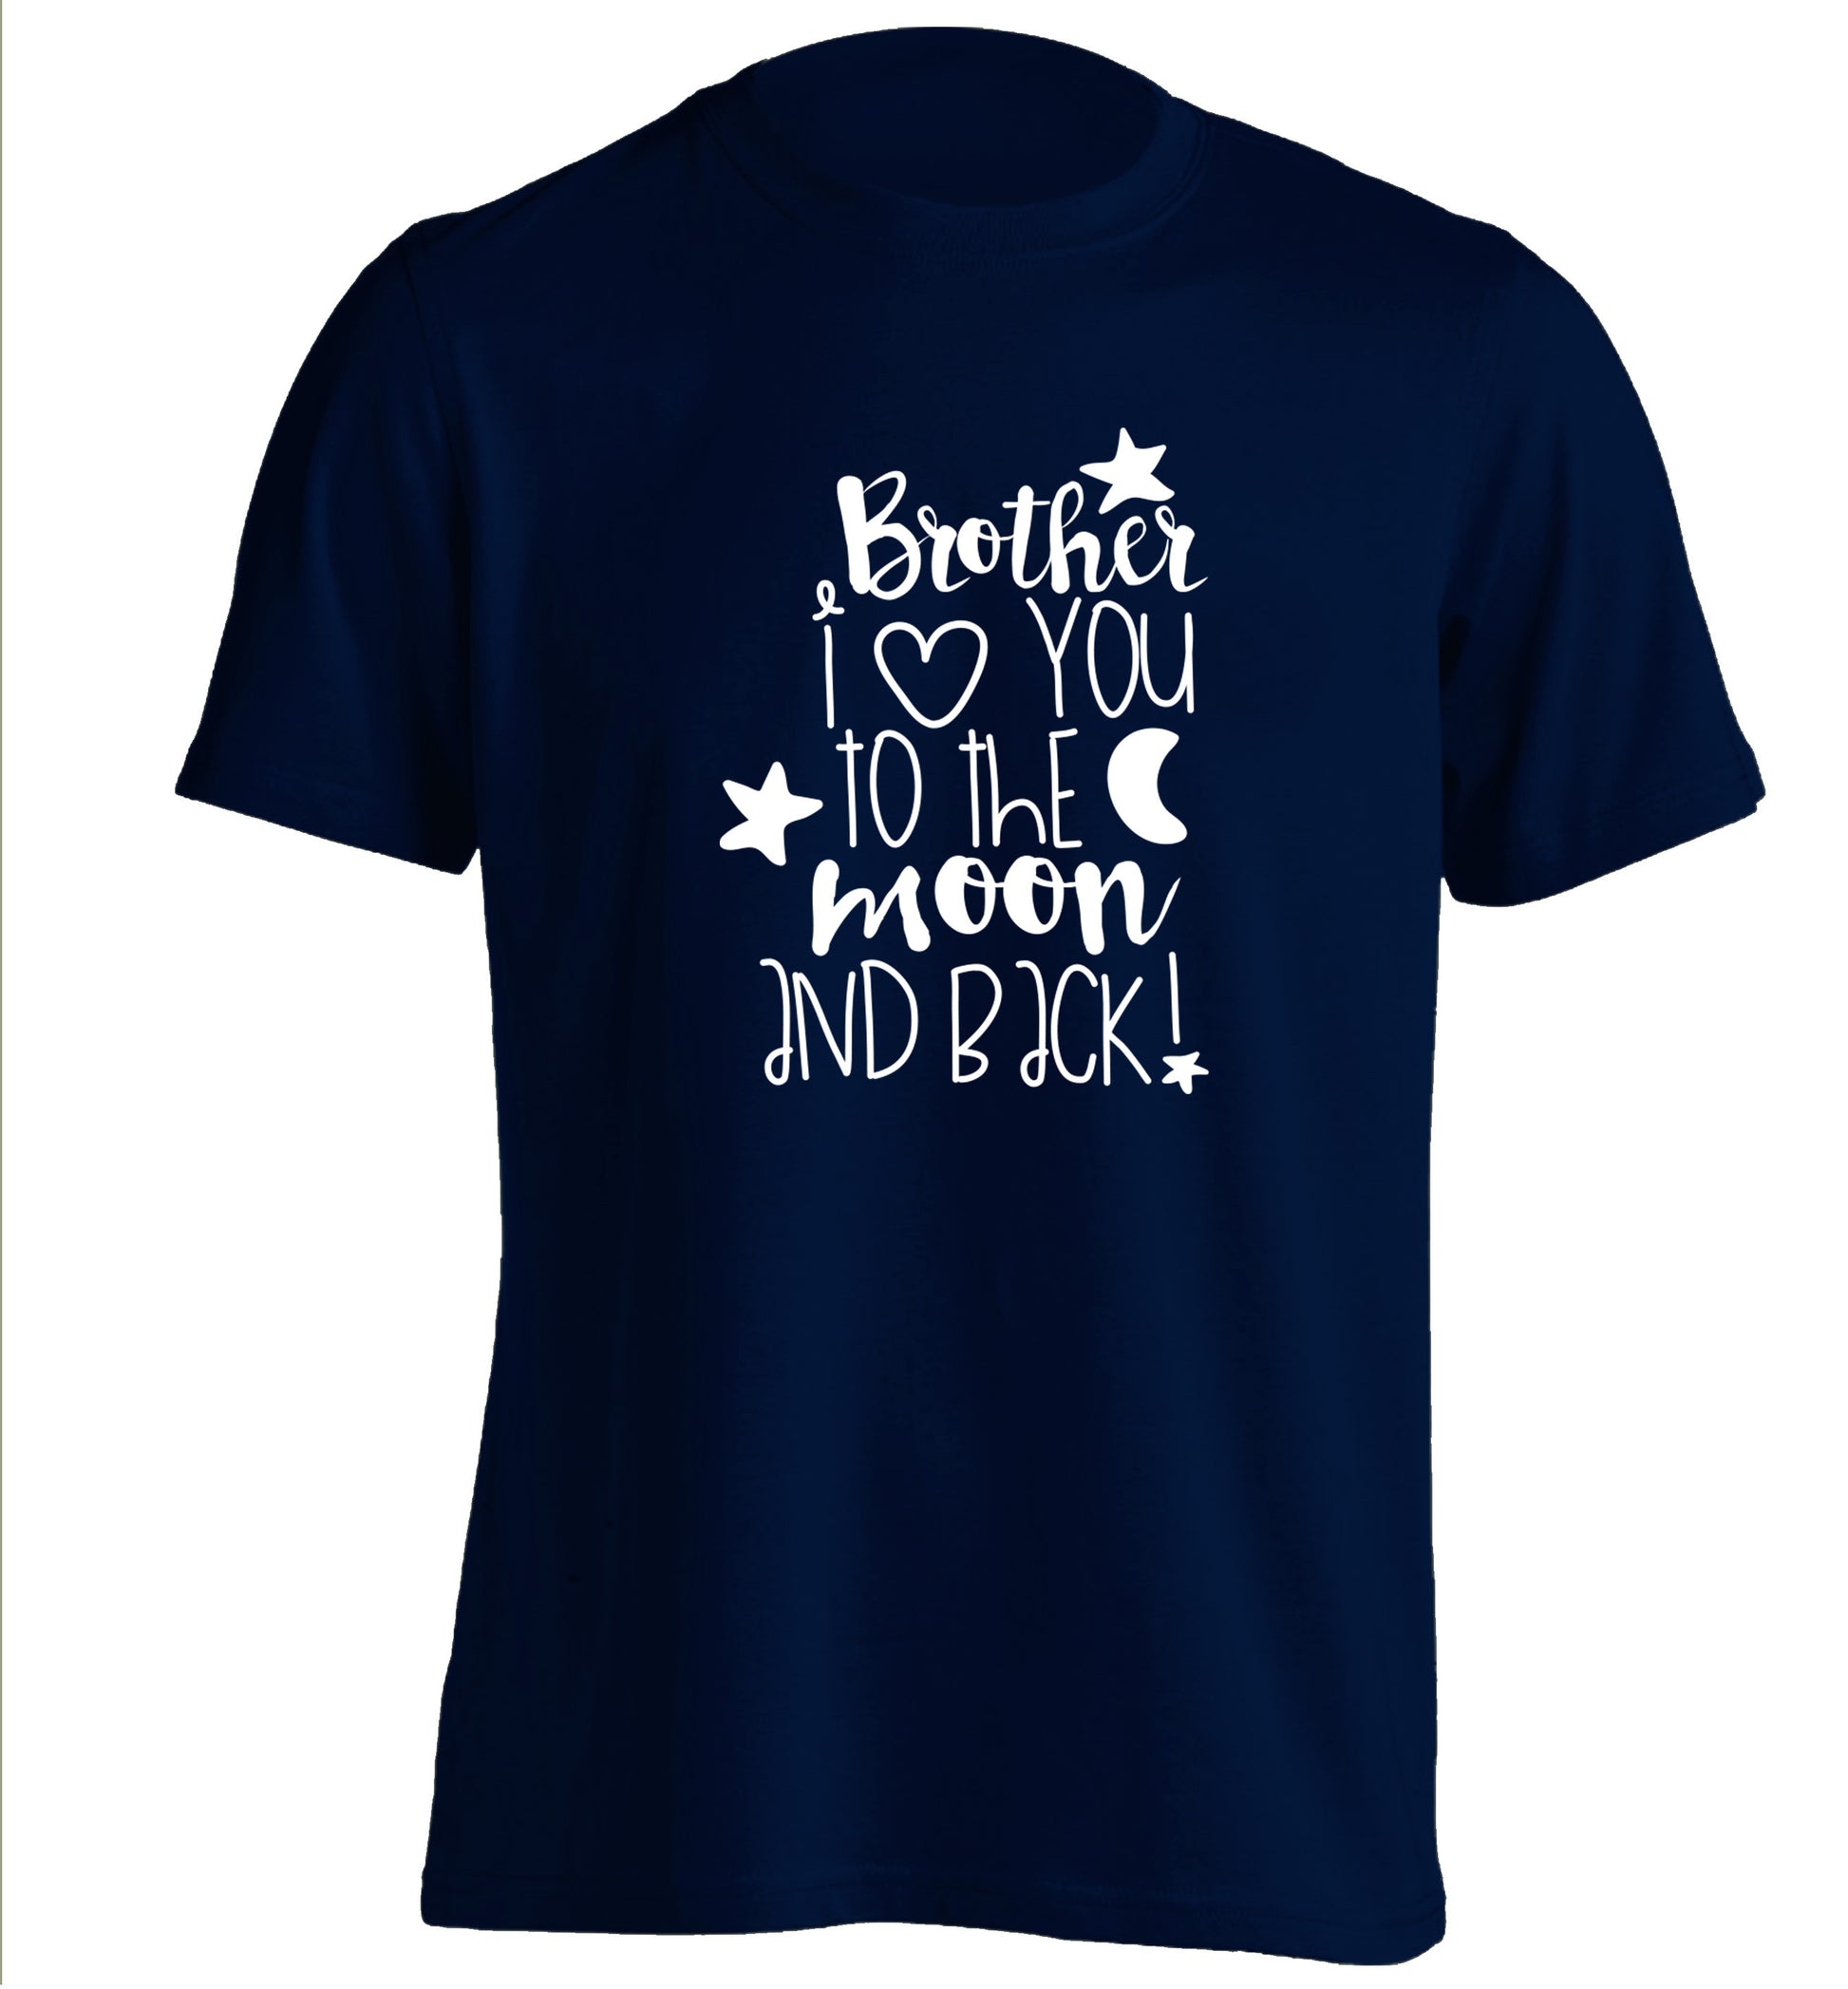 Brother I love you to the moon and back adults unisex navy Tshirt 2XL